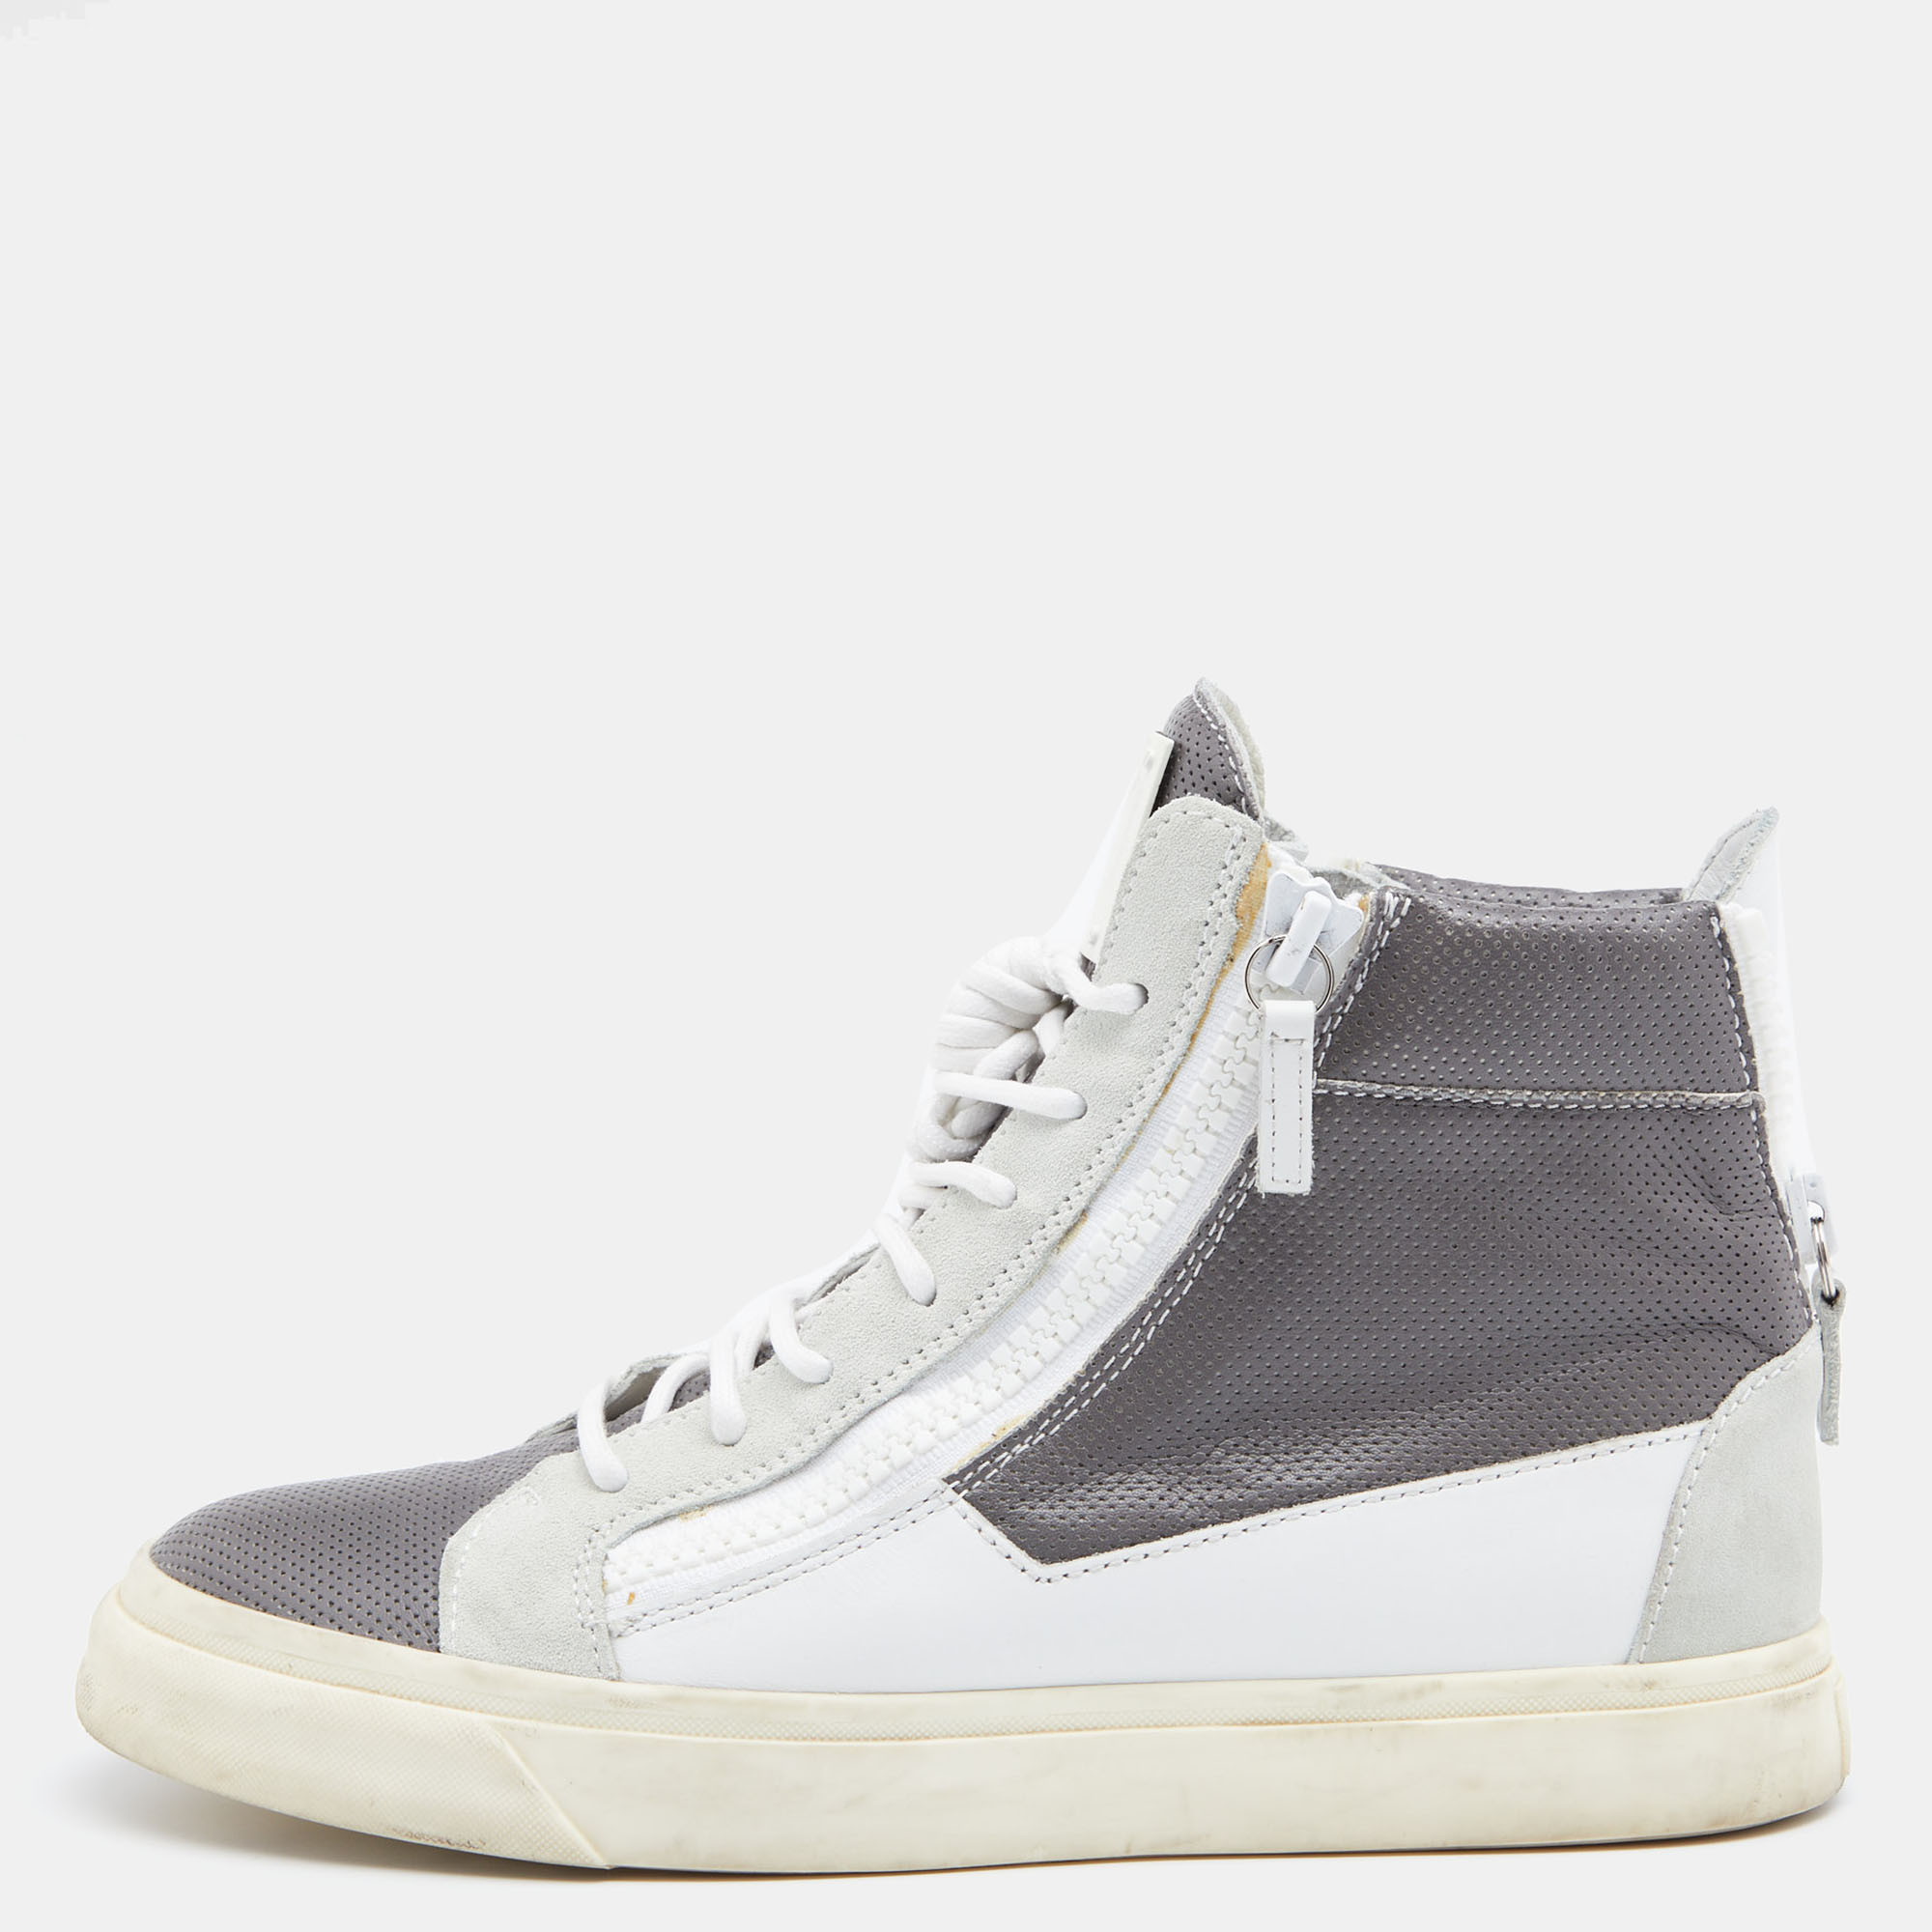 Pre-owned Giuseppe Zanotti Grey/white Perforated Leather And Suede Double Zip High Top Sneakers Size 40